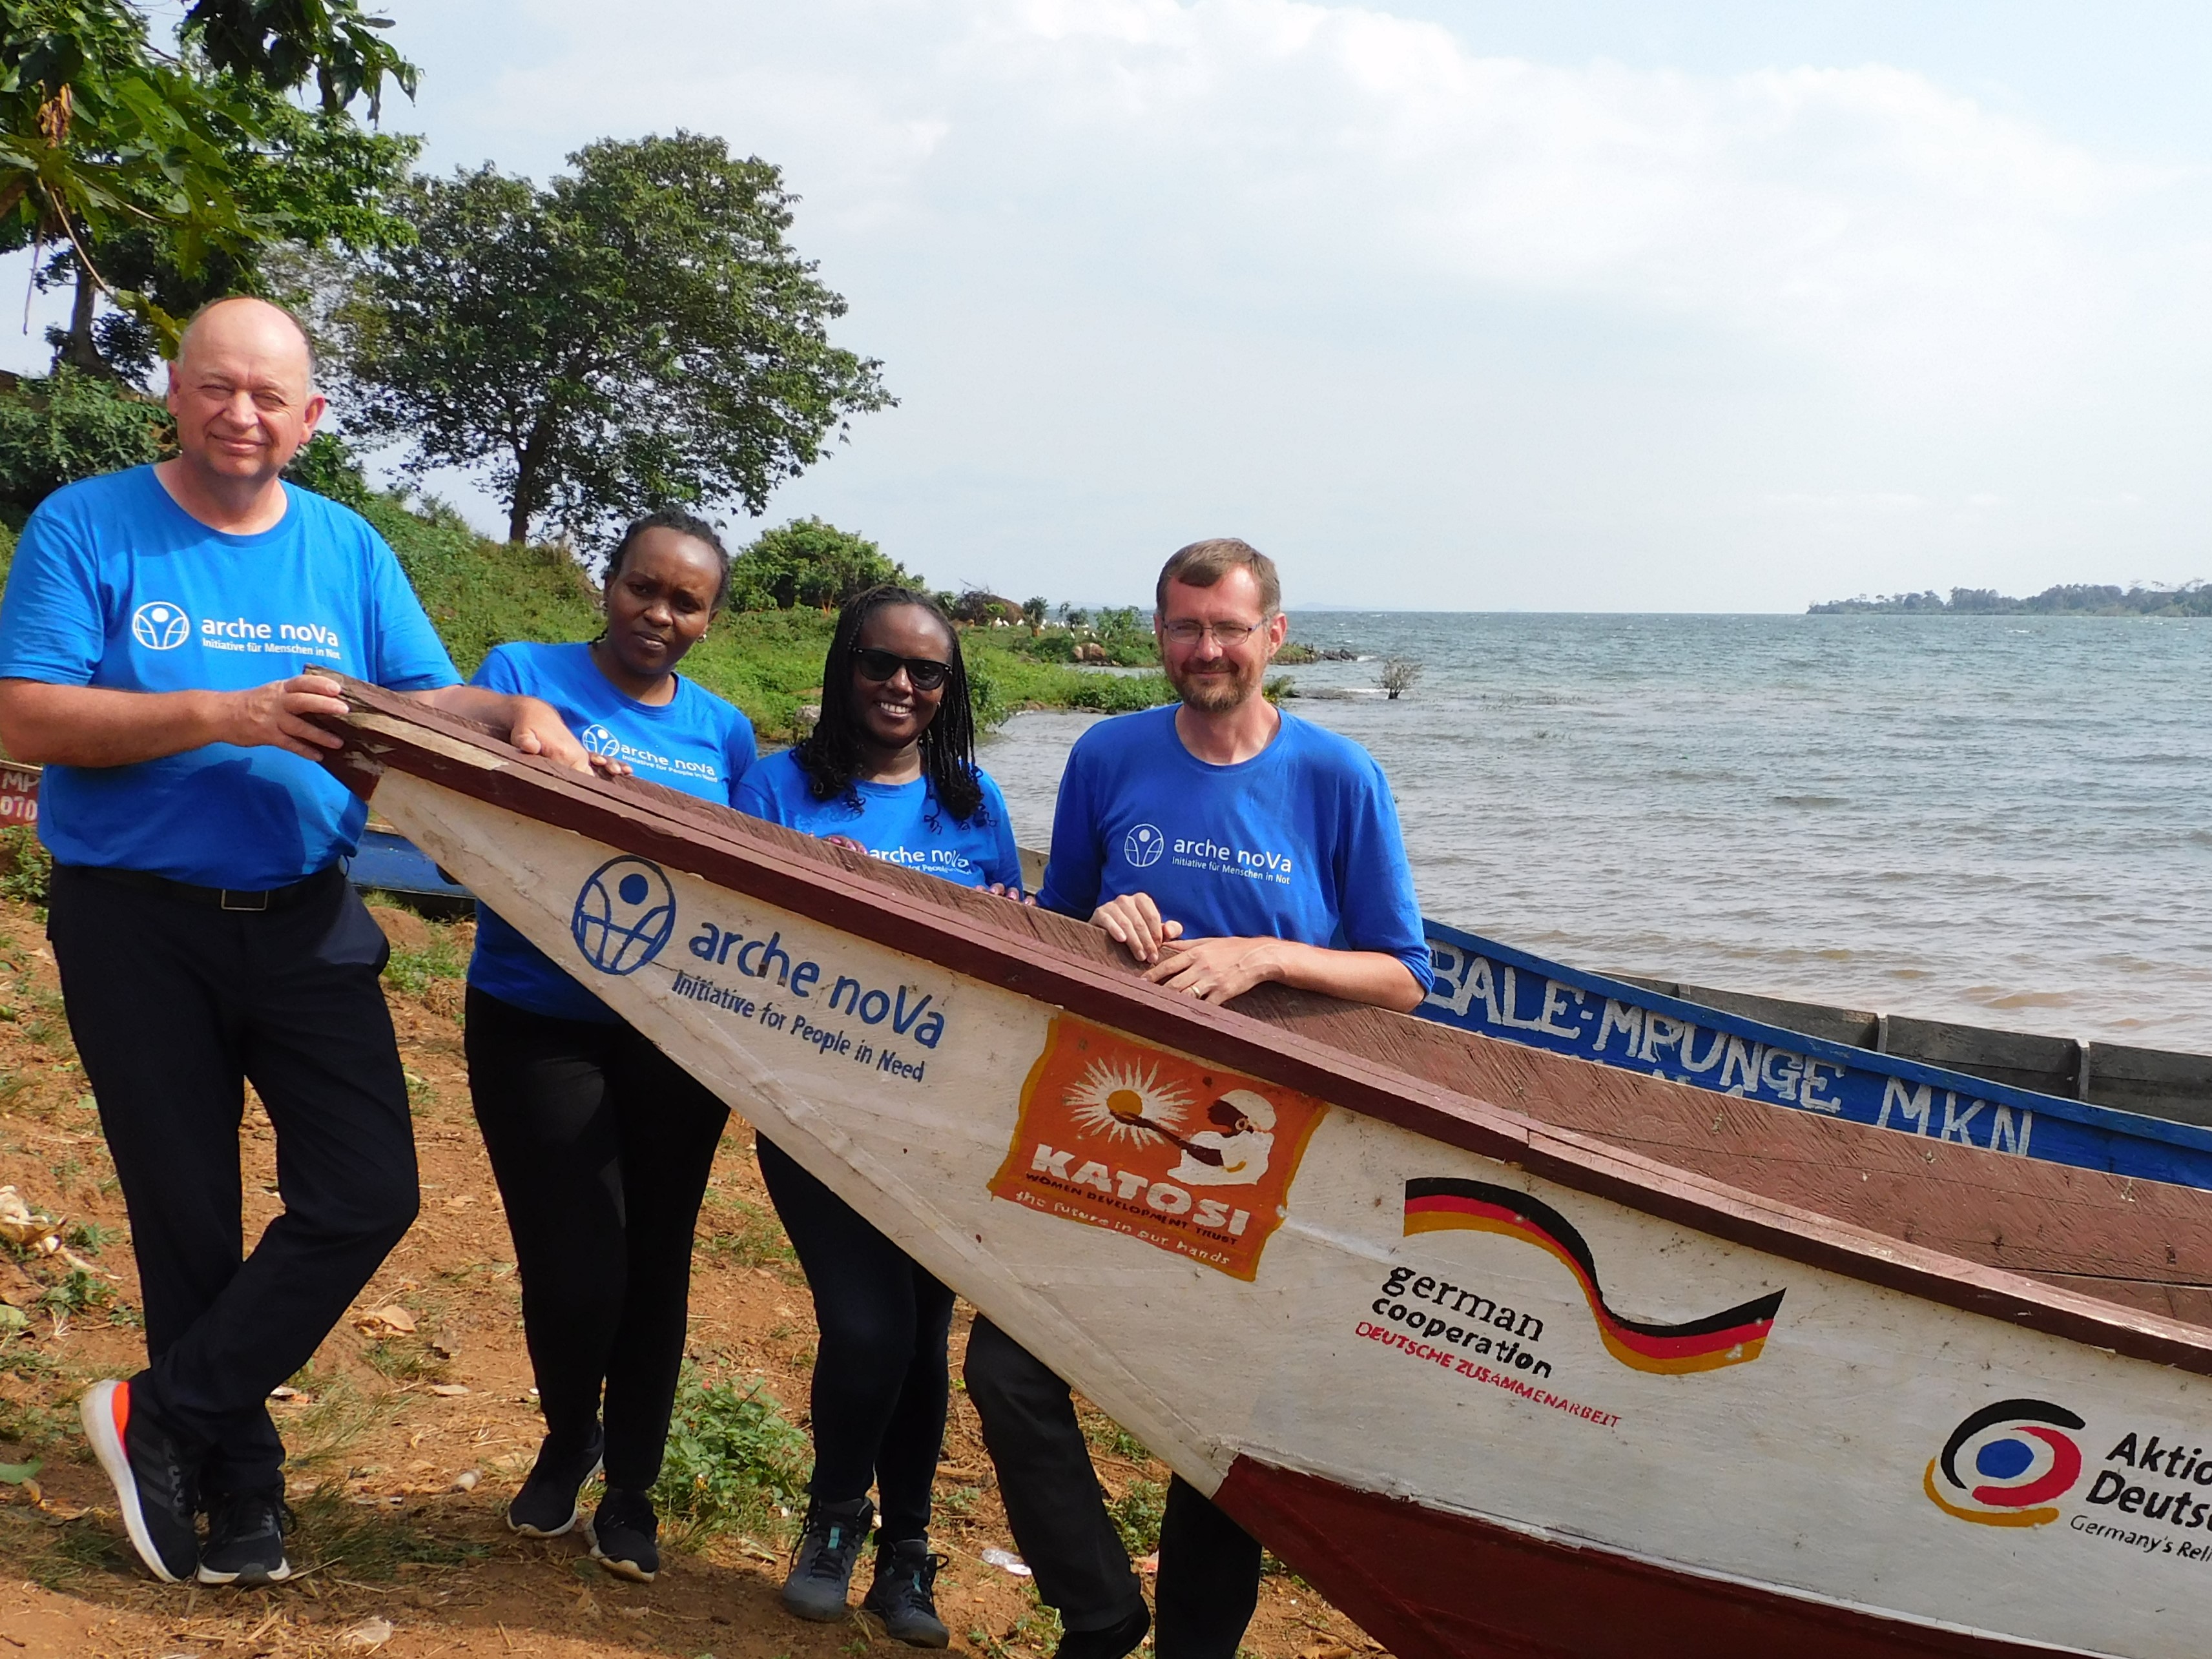 The picture shows the new Managing Director of arche noVa, Dr. Jens Ola (left). Together with Mathias Anderson (right), Sophia Maina (Regional MEAL/Reporting Officer, 2nd from left) and Juliet Muthiani (Program Officer), he is standing behind a fishing boat that arche noVa provided to the fishing community of Mbale in Uganda.